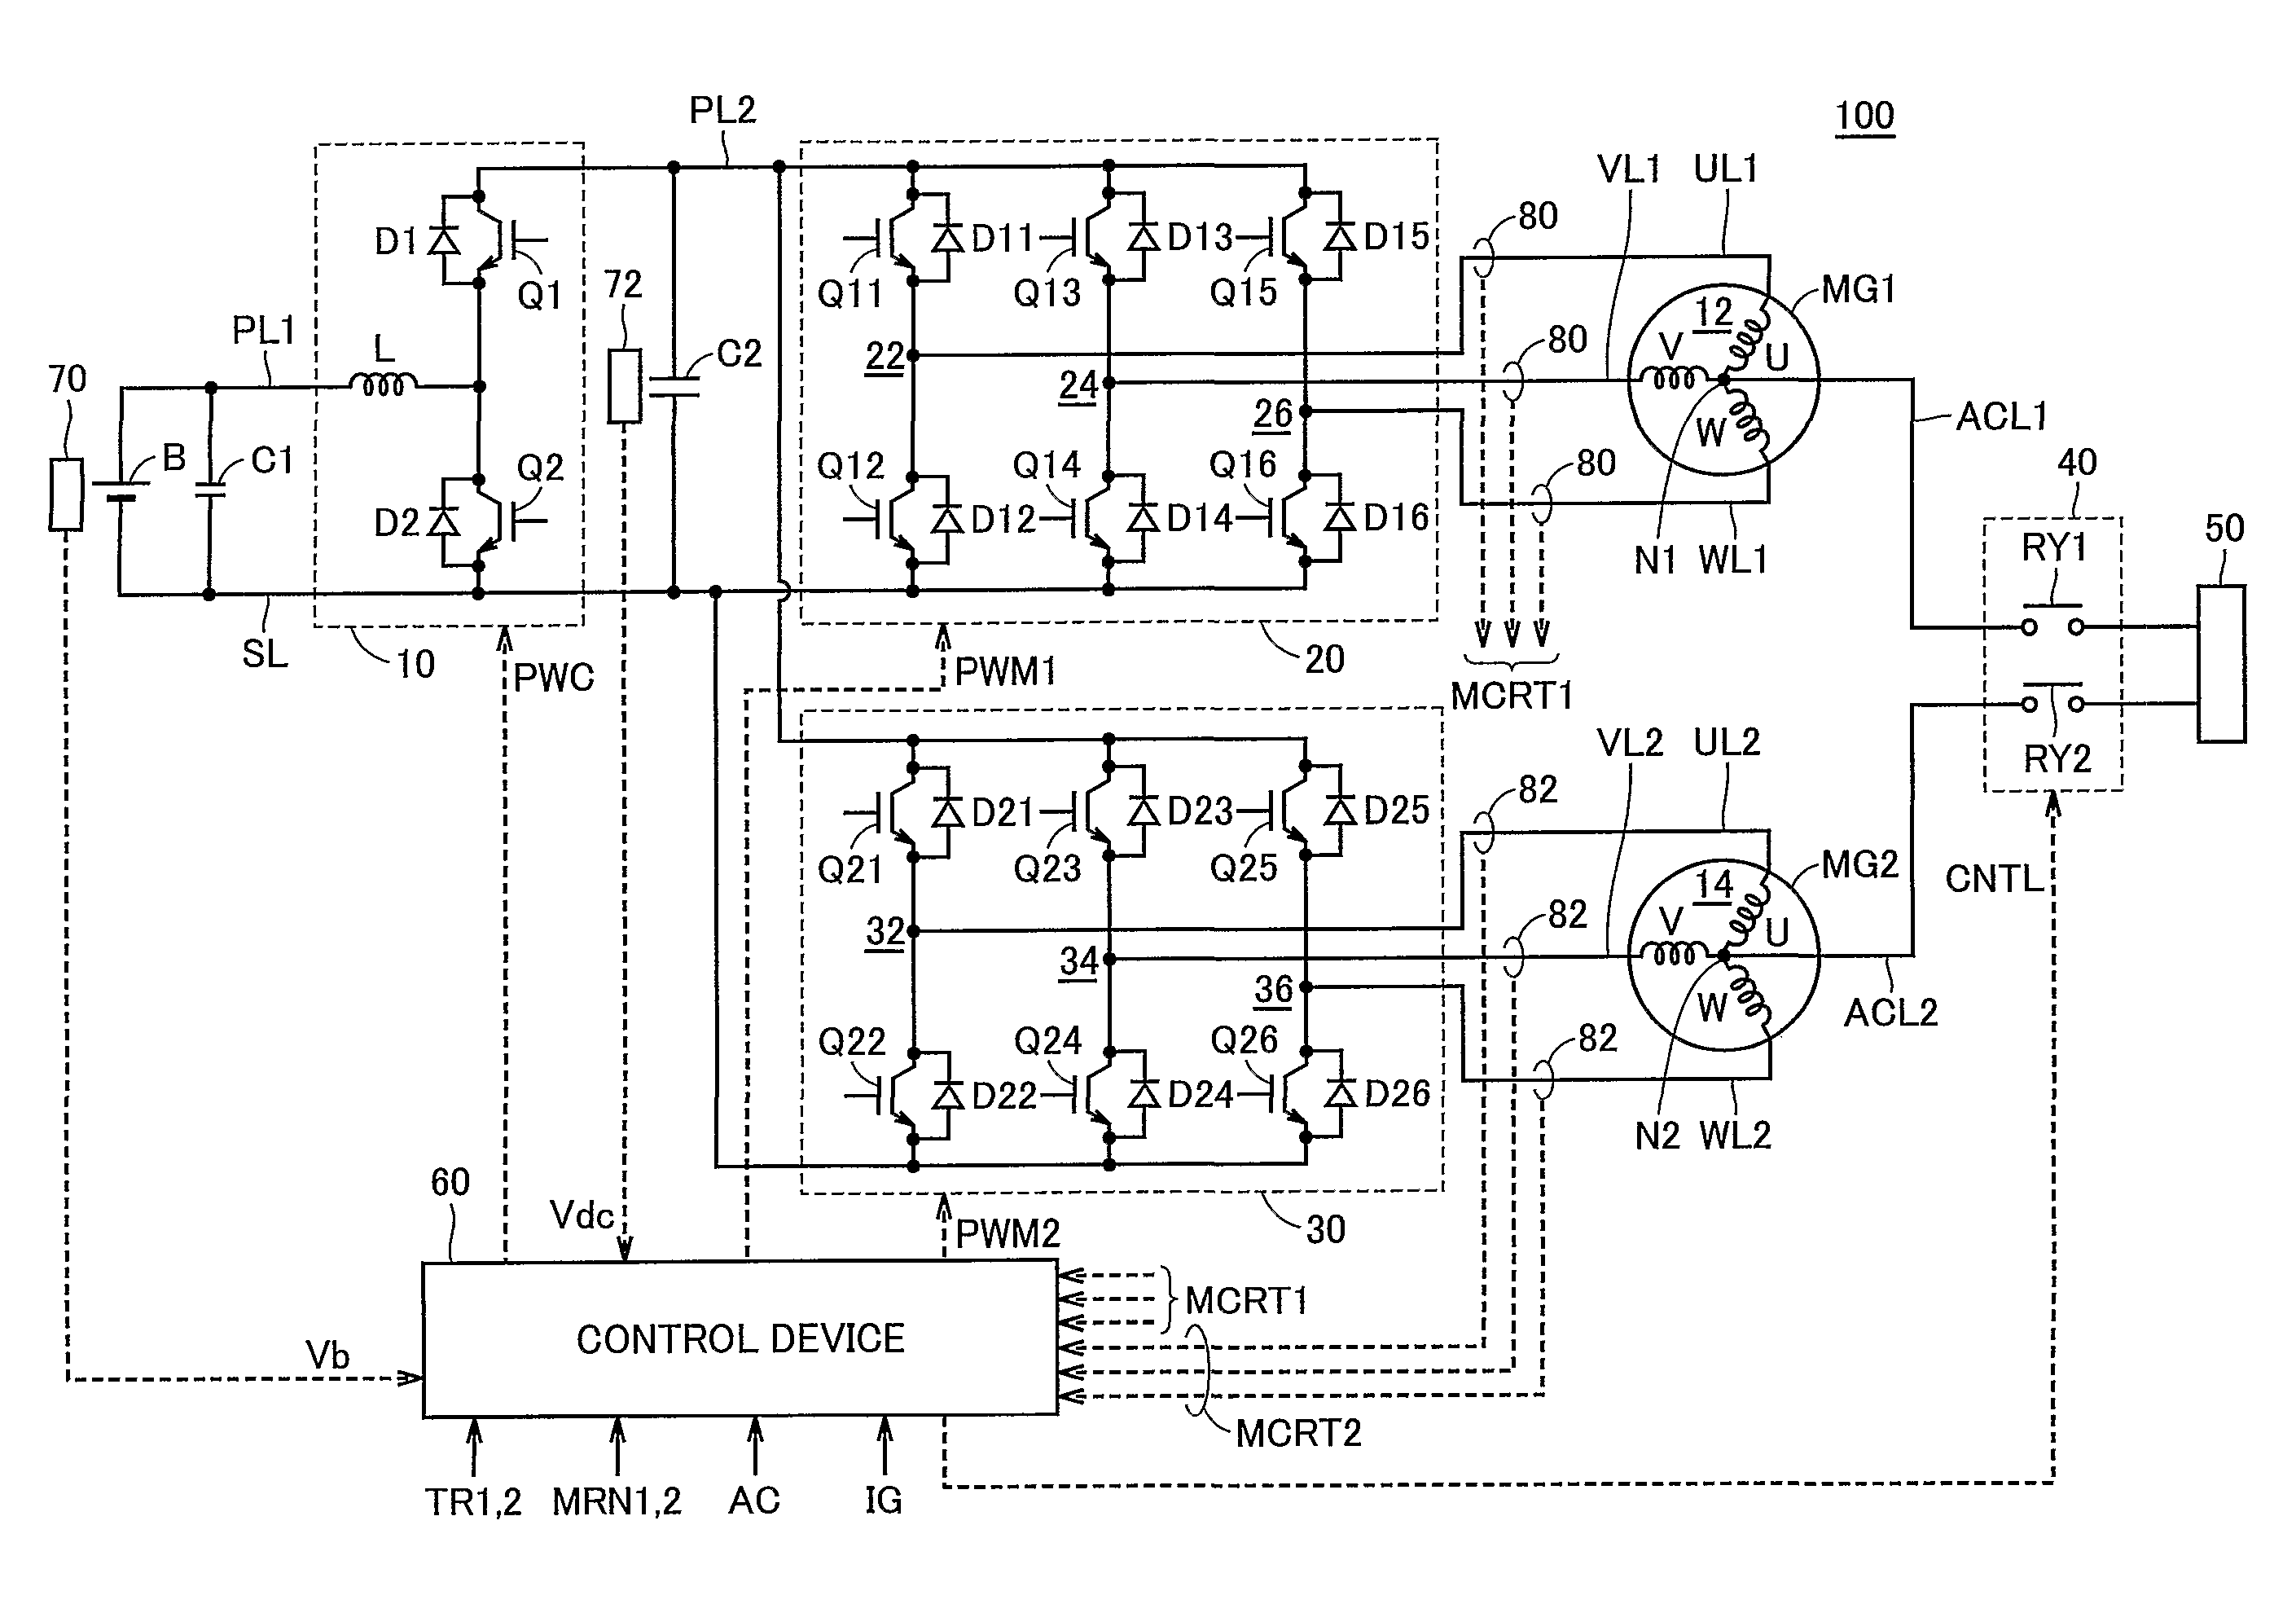 Alternating voltage generation apparatus and power output apparatus